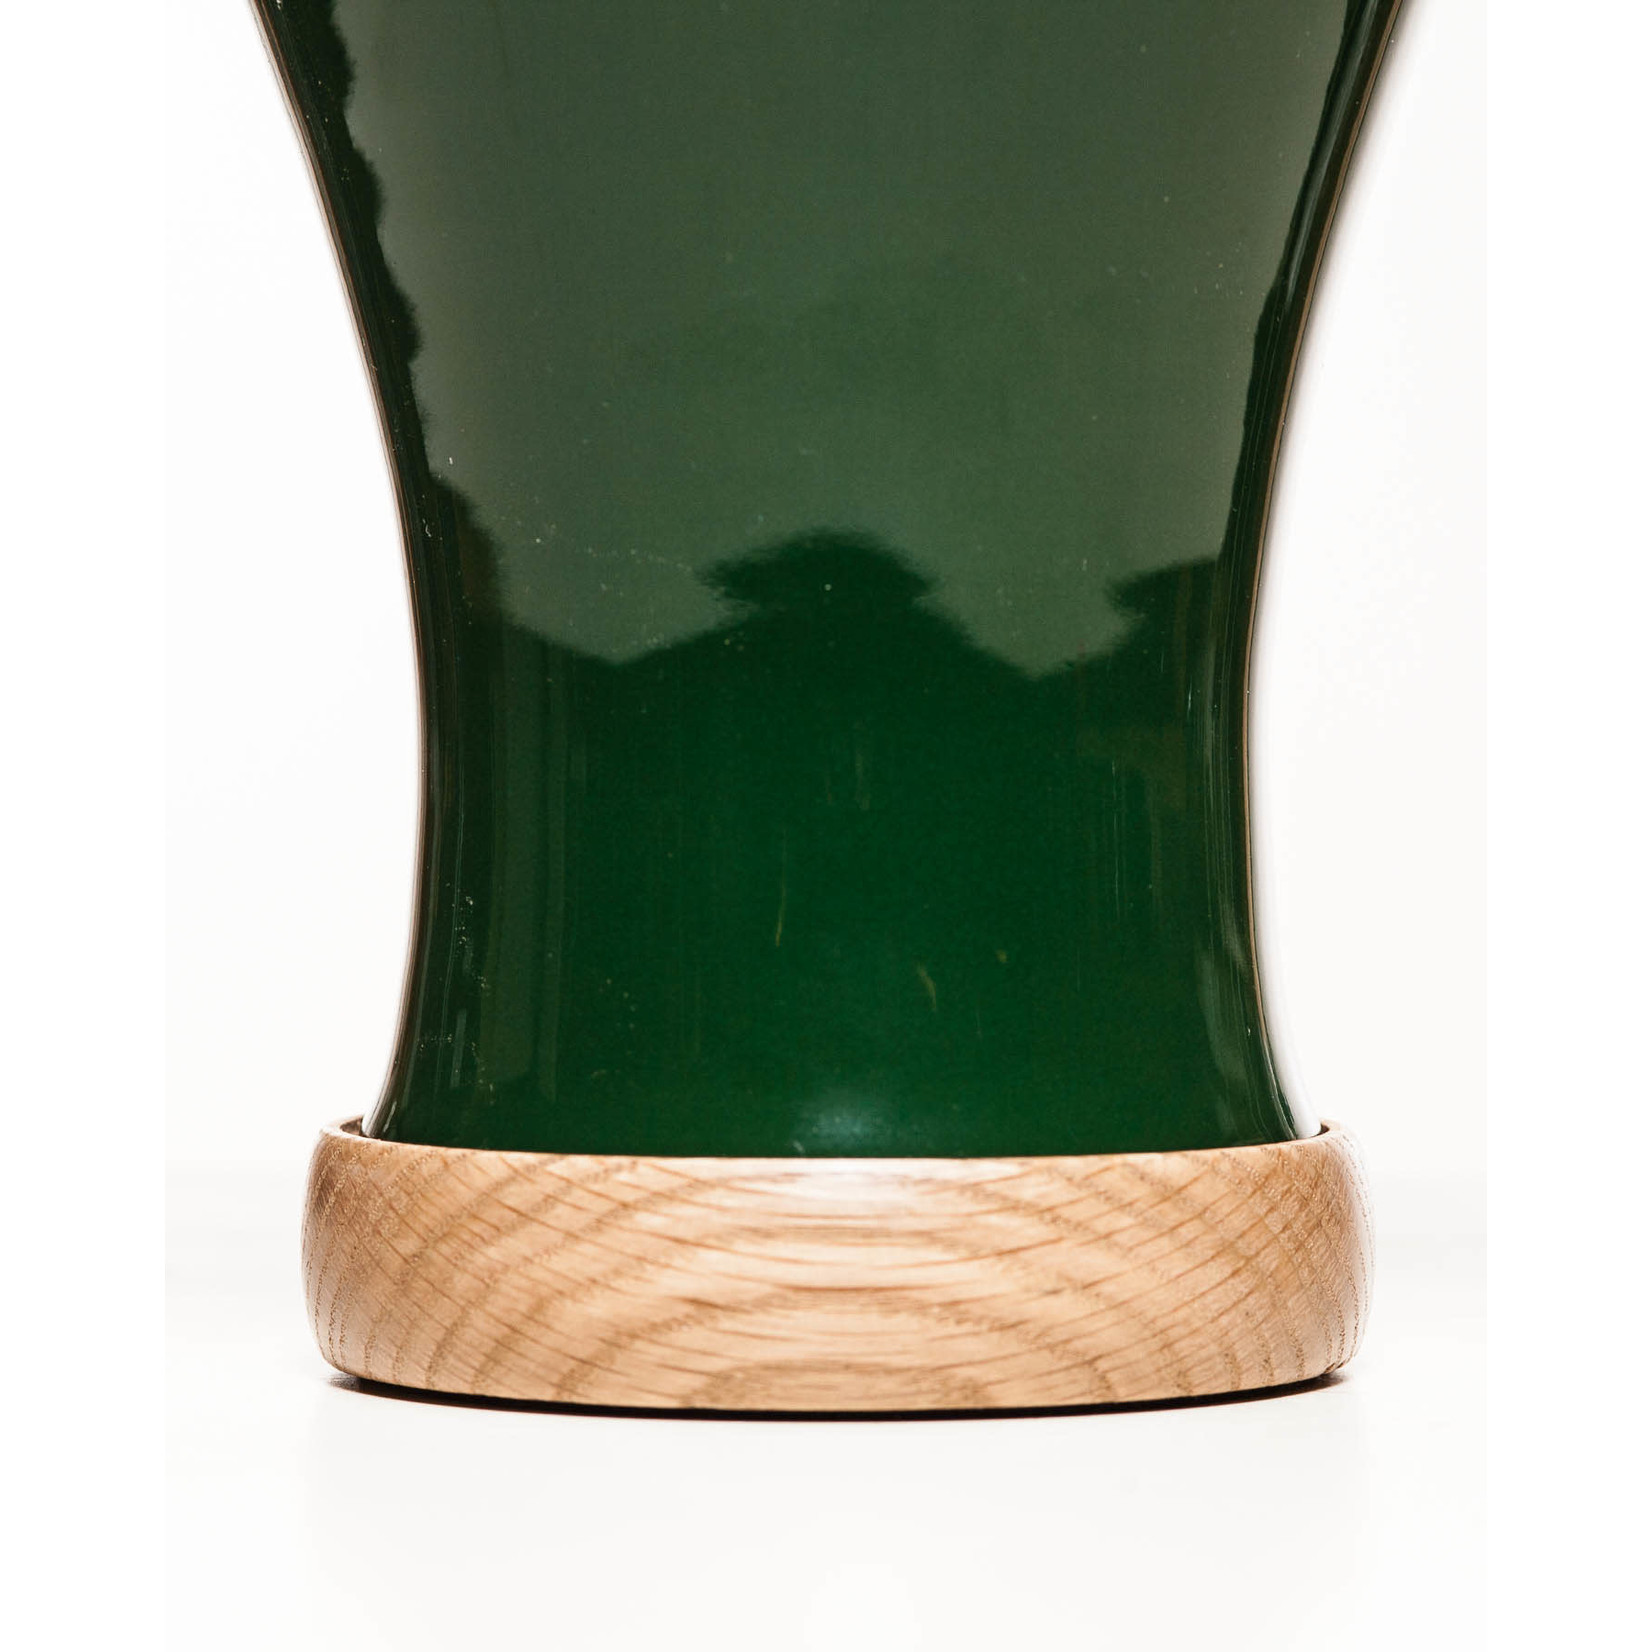 Lawrence & Scott Gabrielle Table Lamp in Racing Green with White Oak Base